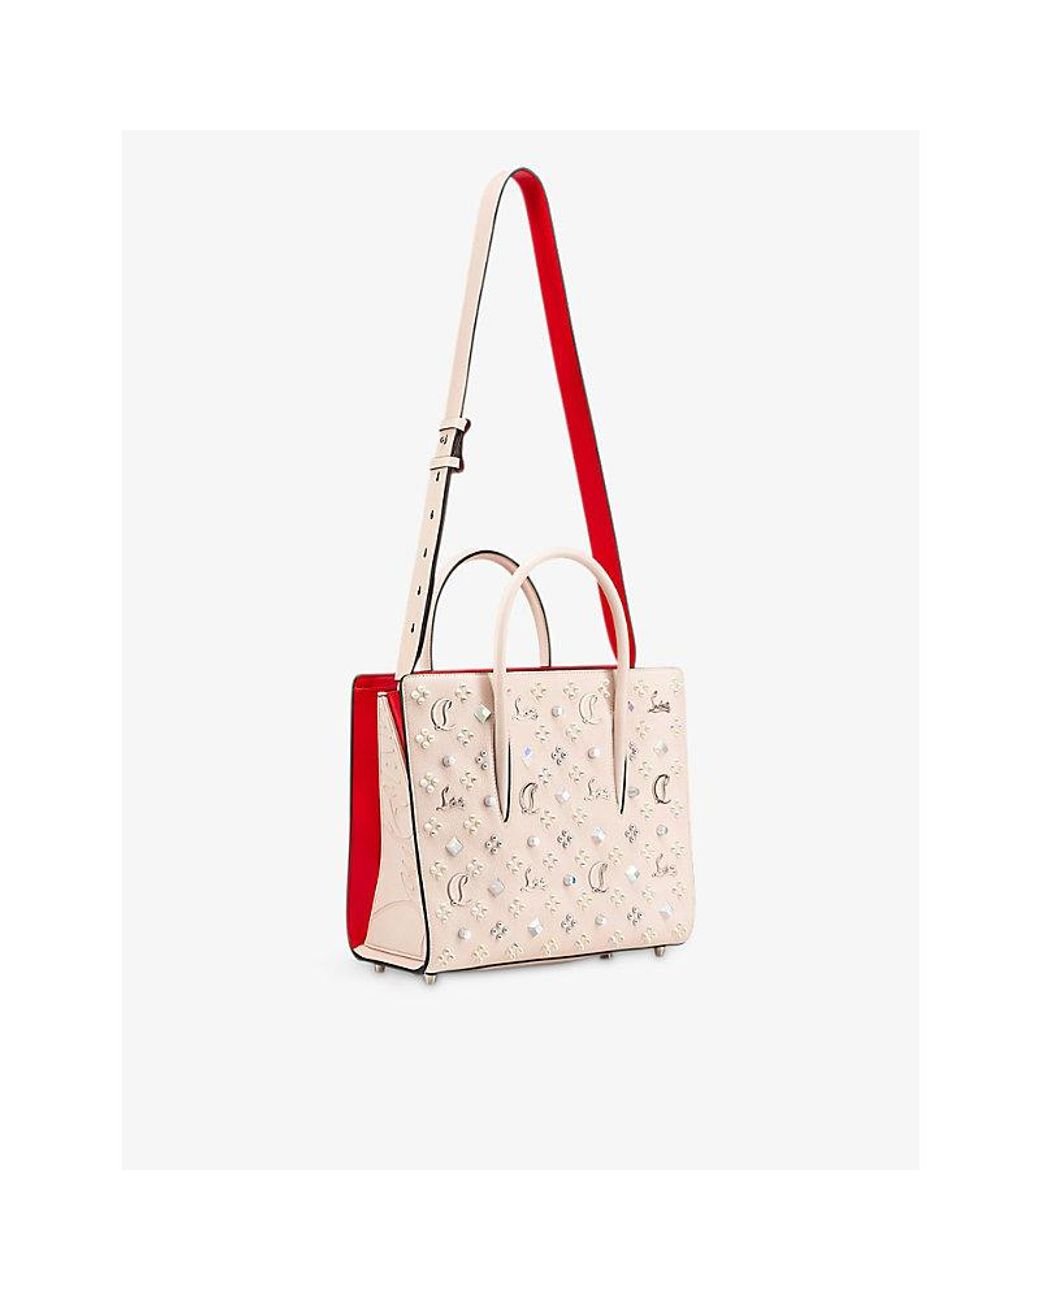 Christian Louboutin Letche Coloured Leather Tote Bag in Pink